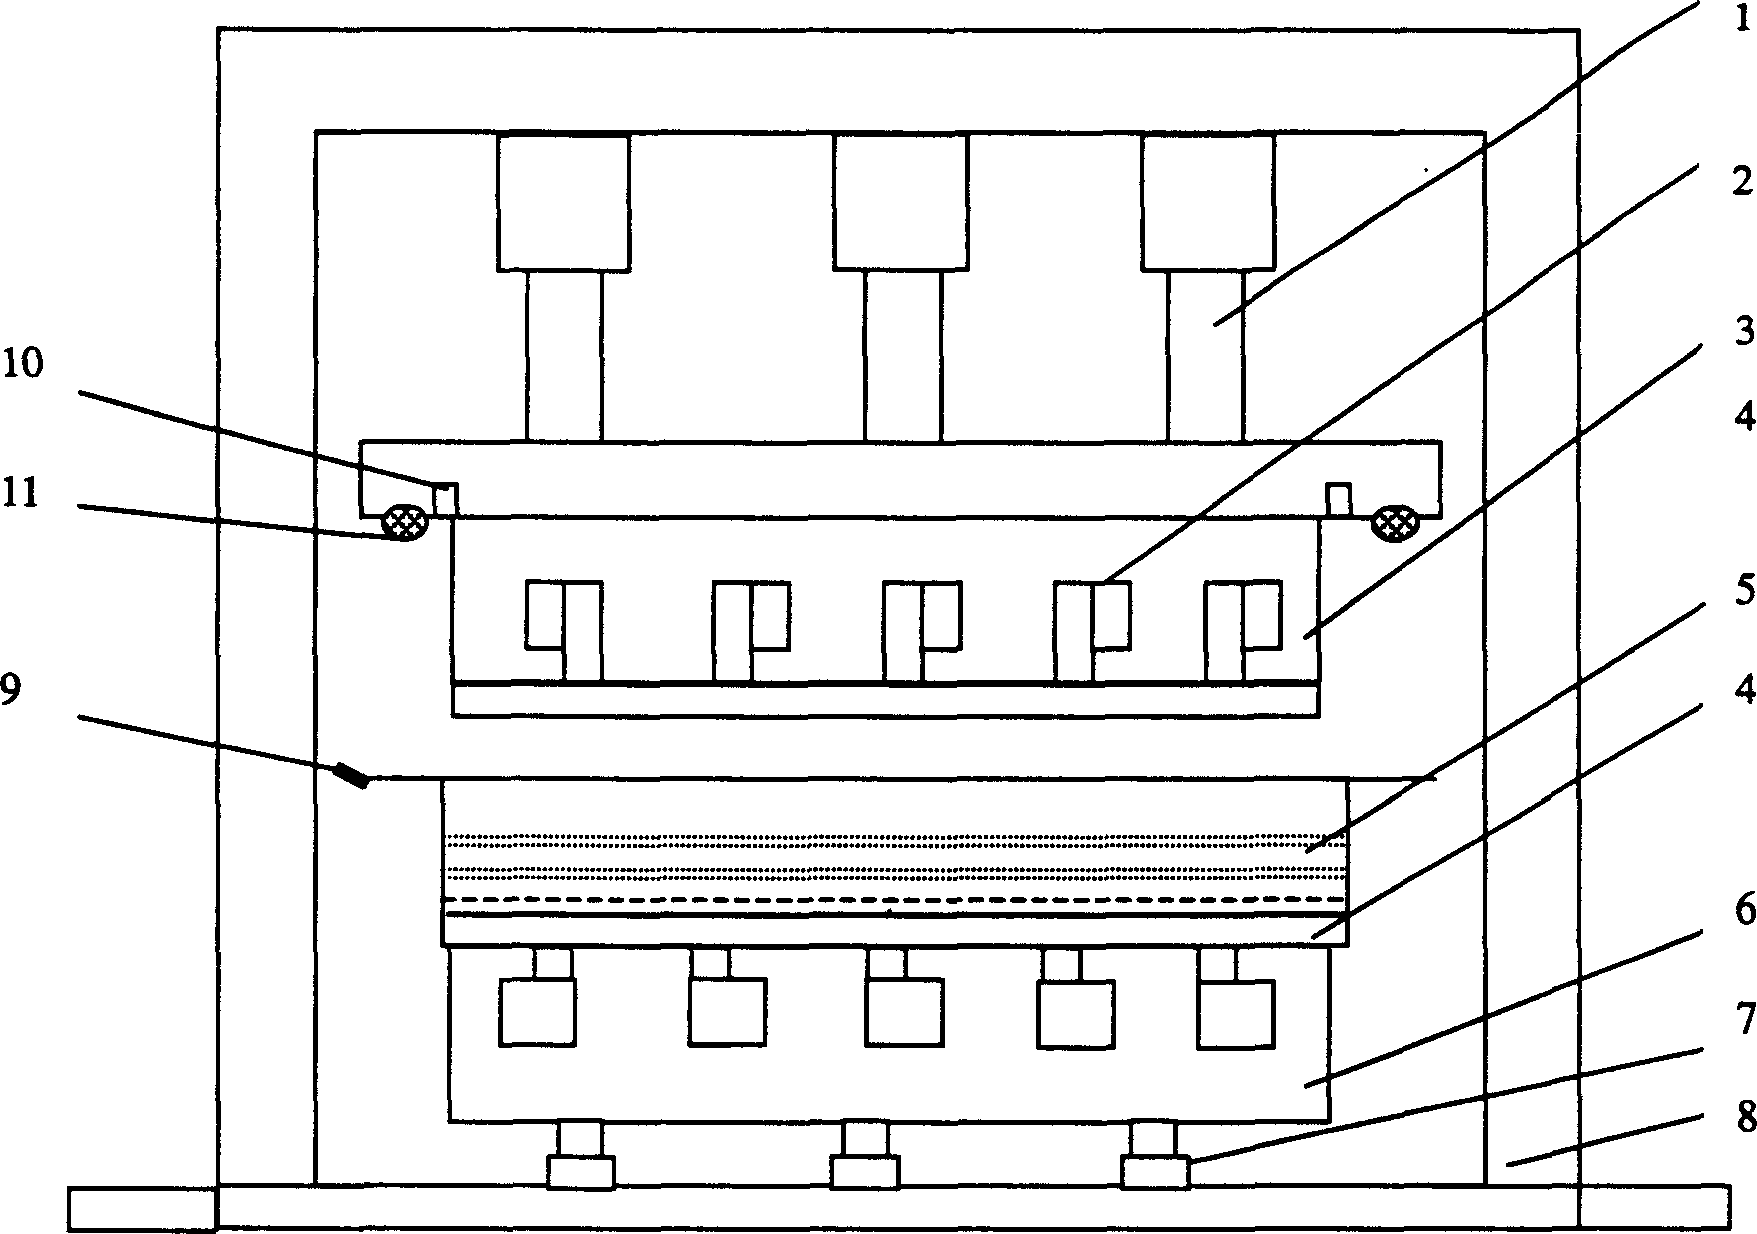 Microwave hot forming apparatus